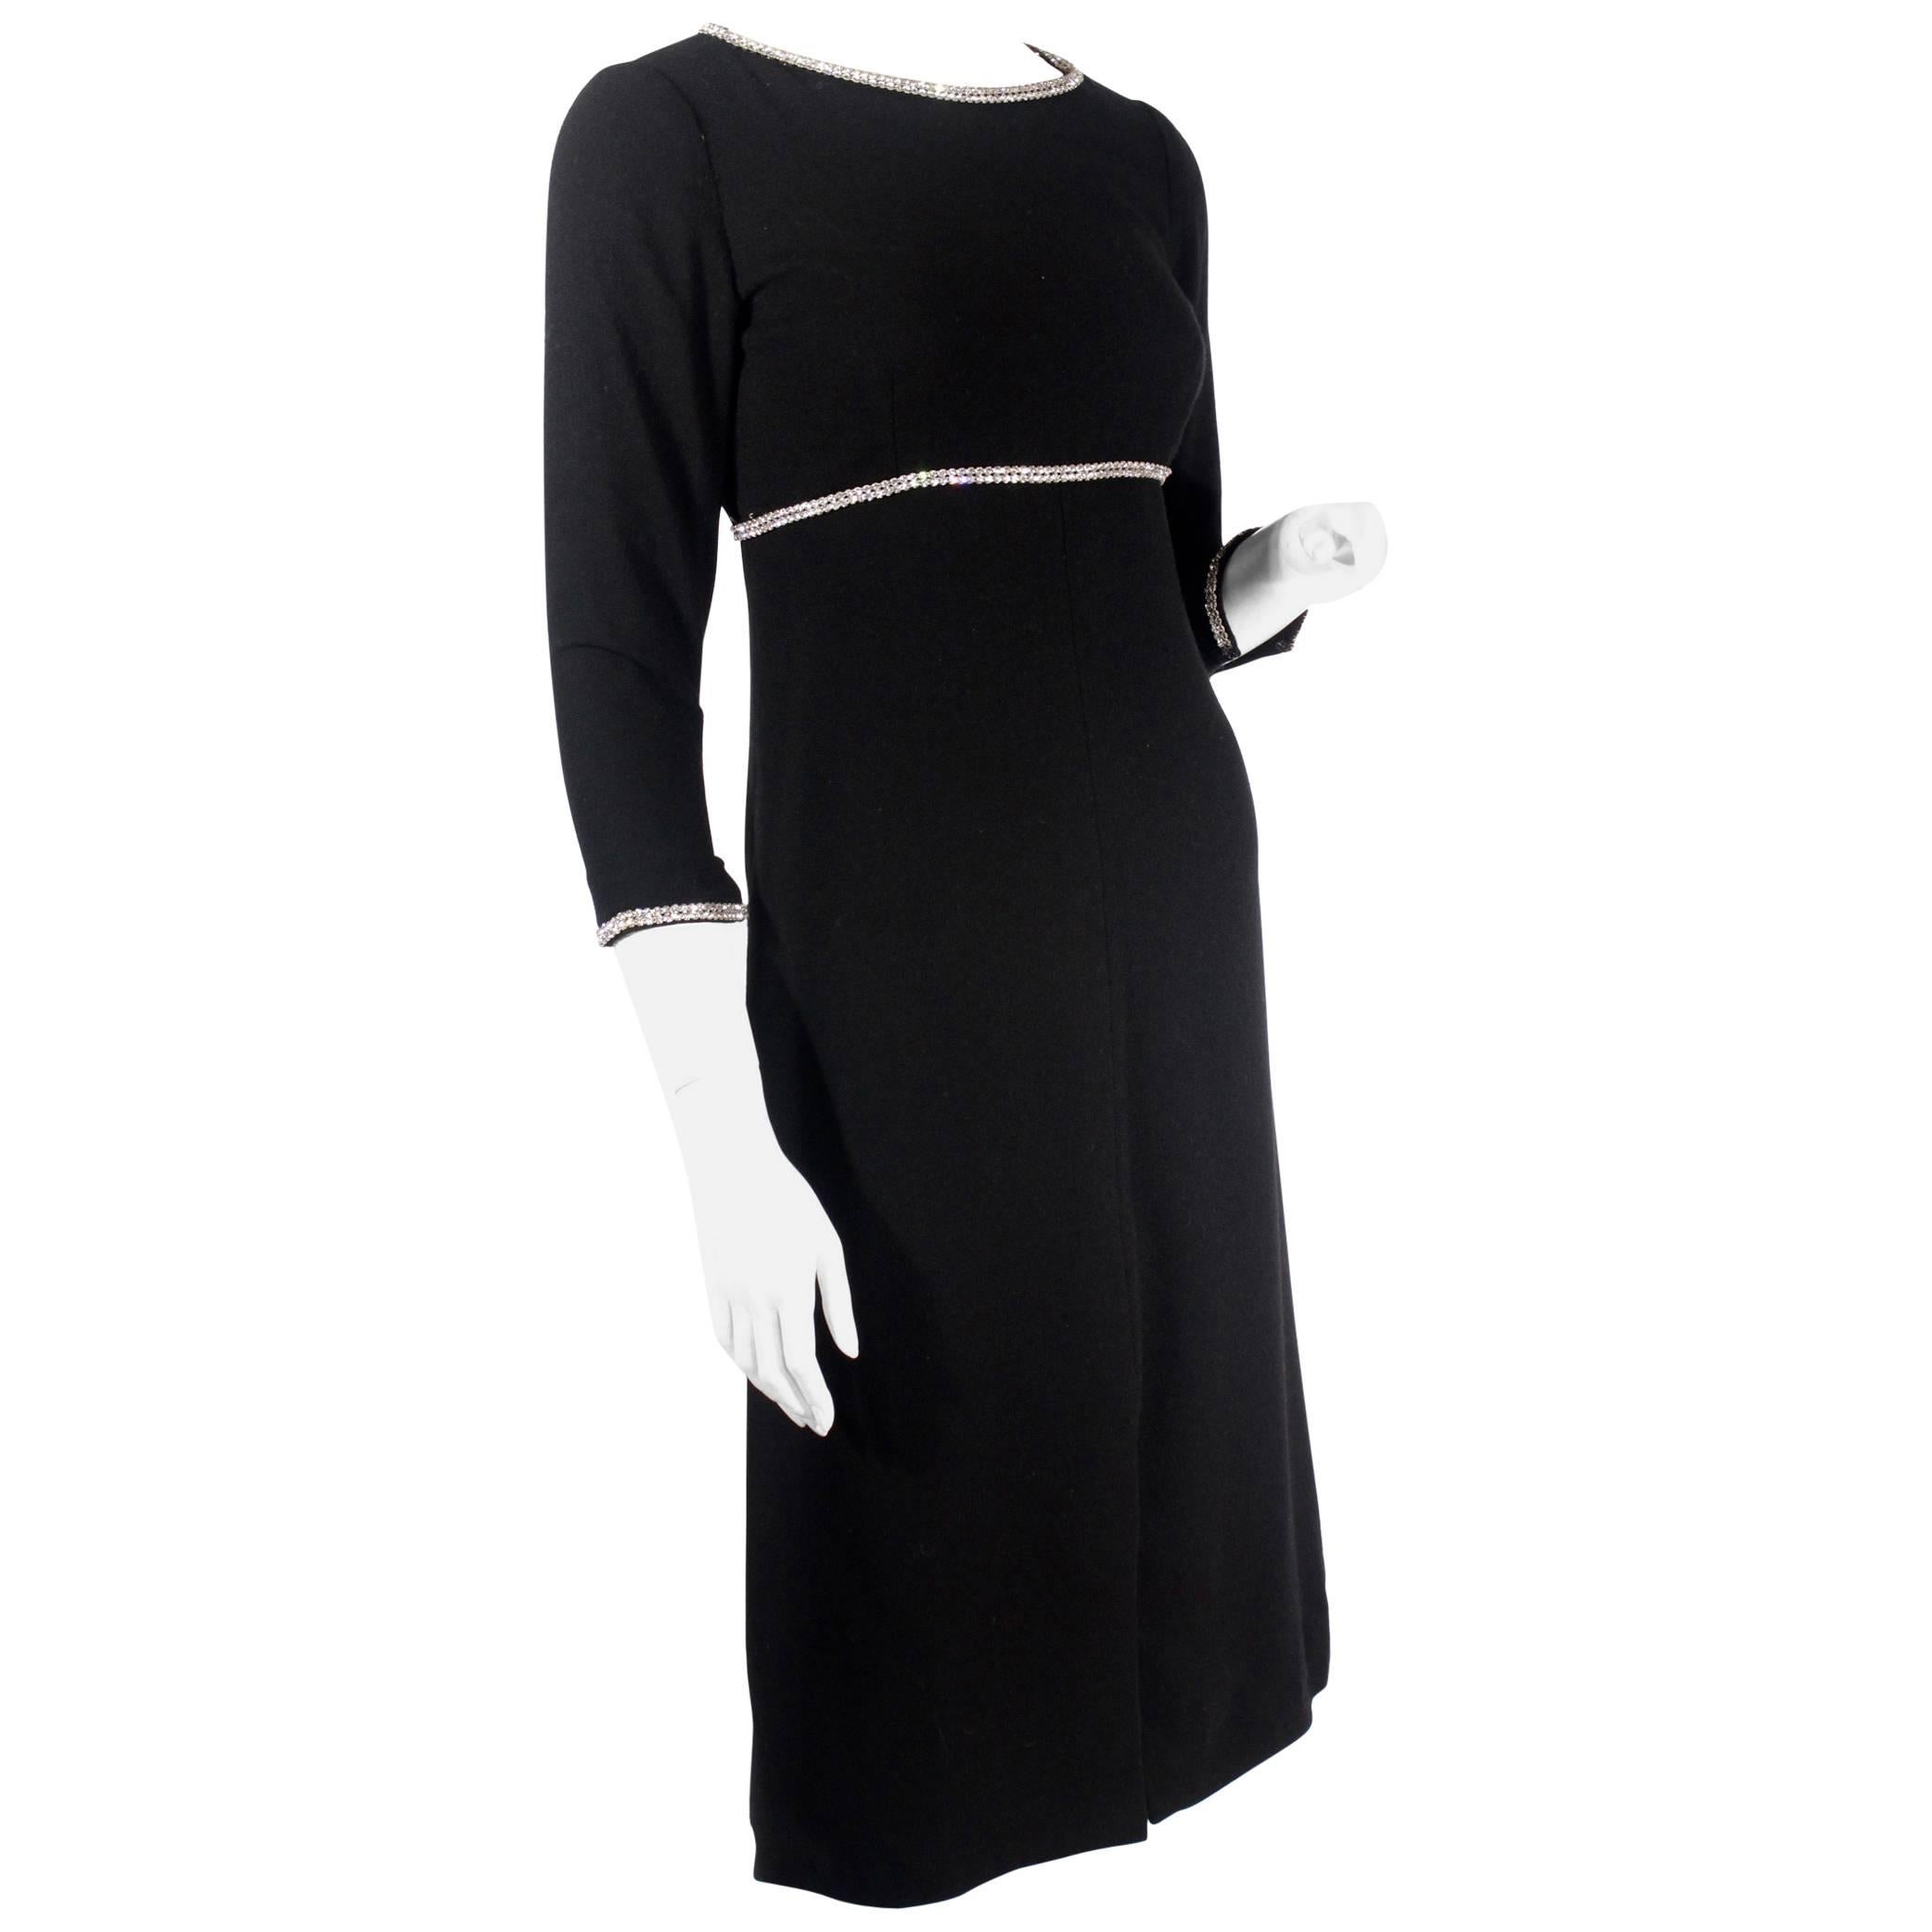 Norman Norell Black Crepe Dress with Rhinestones For Sale